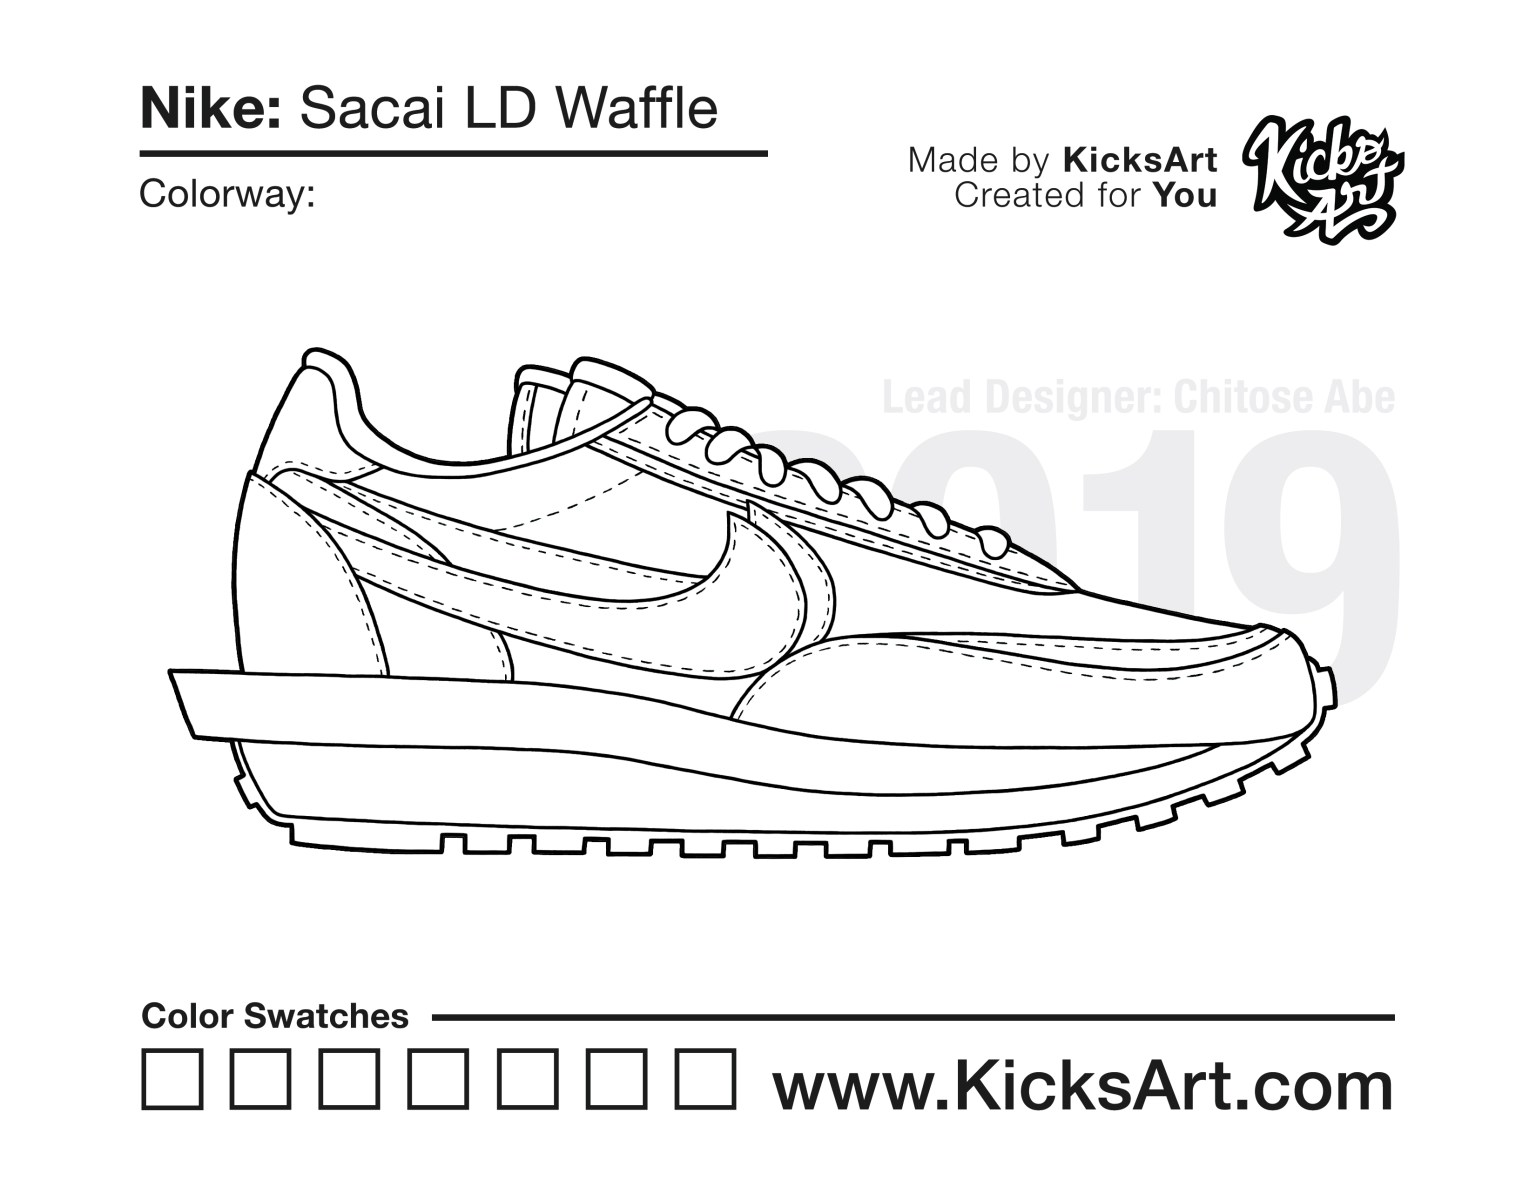 Nike sacai ld waffle sneaker coloring pages